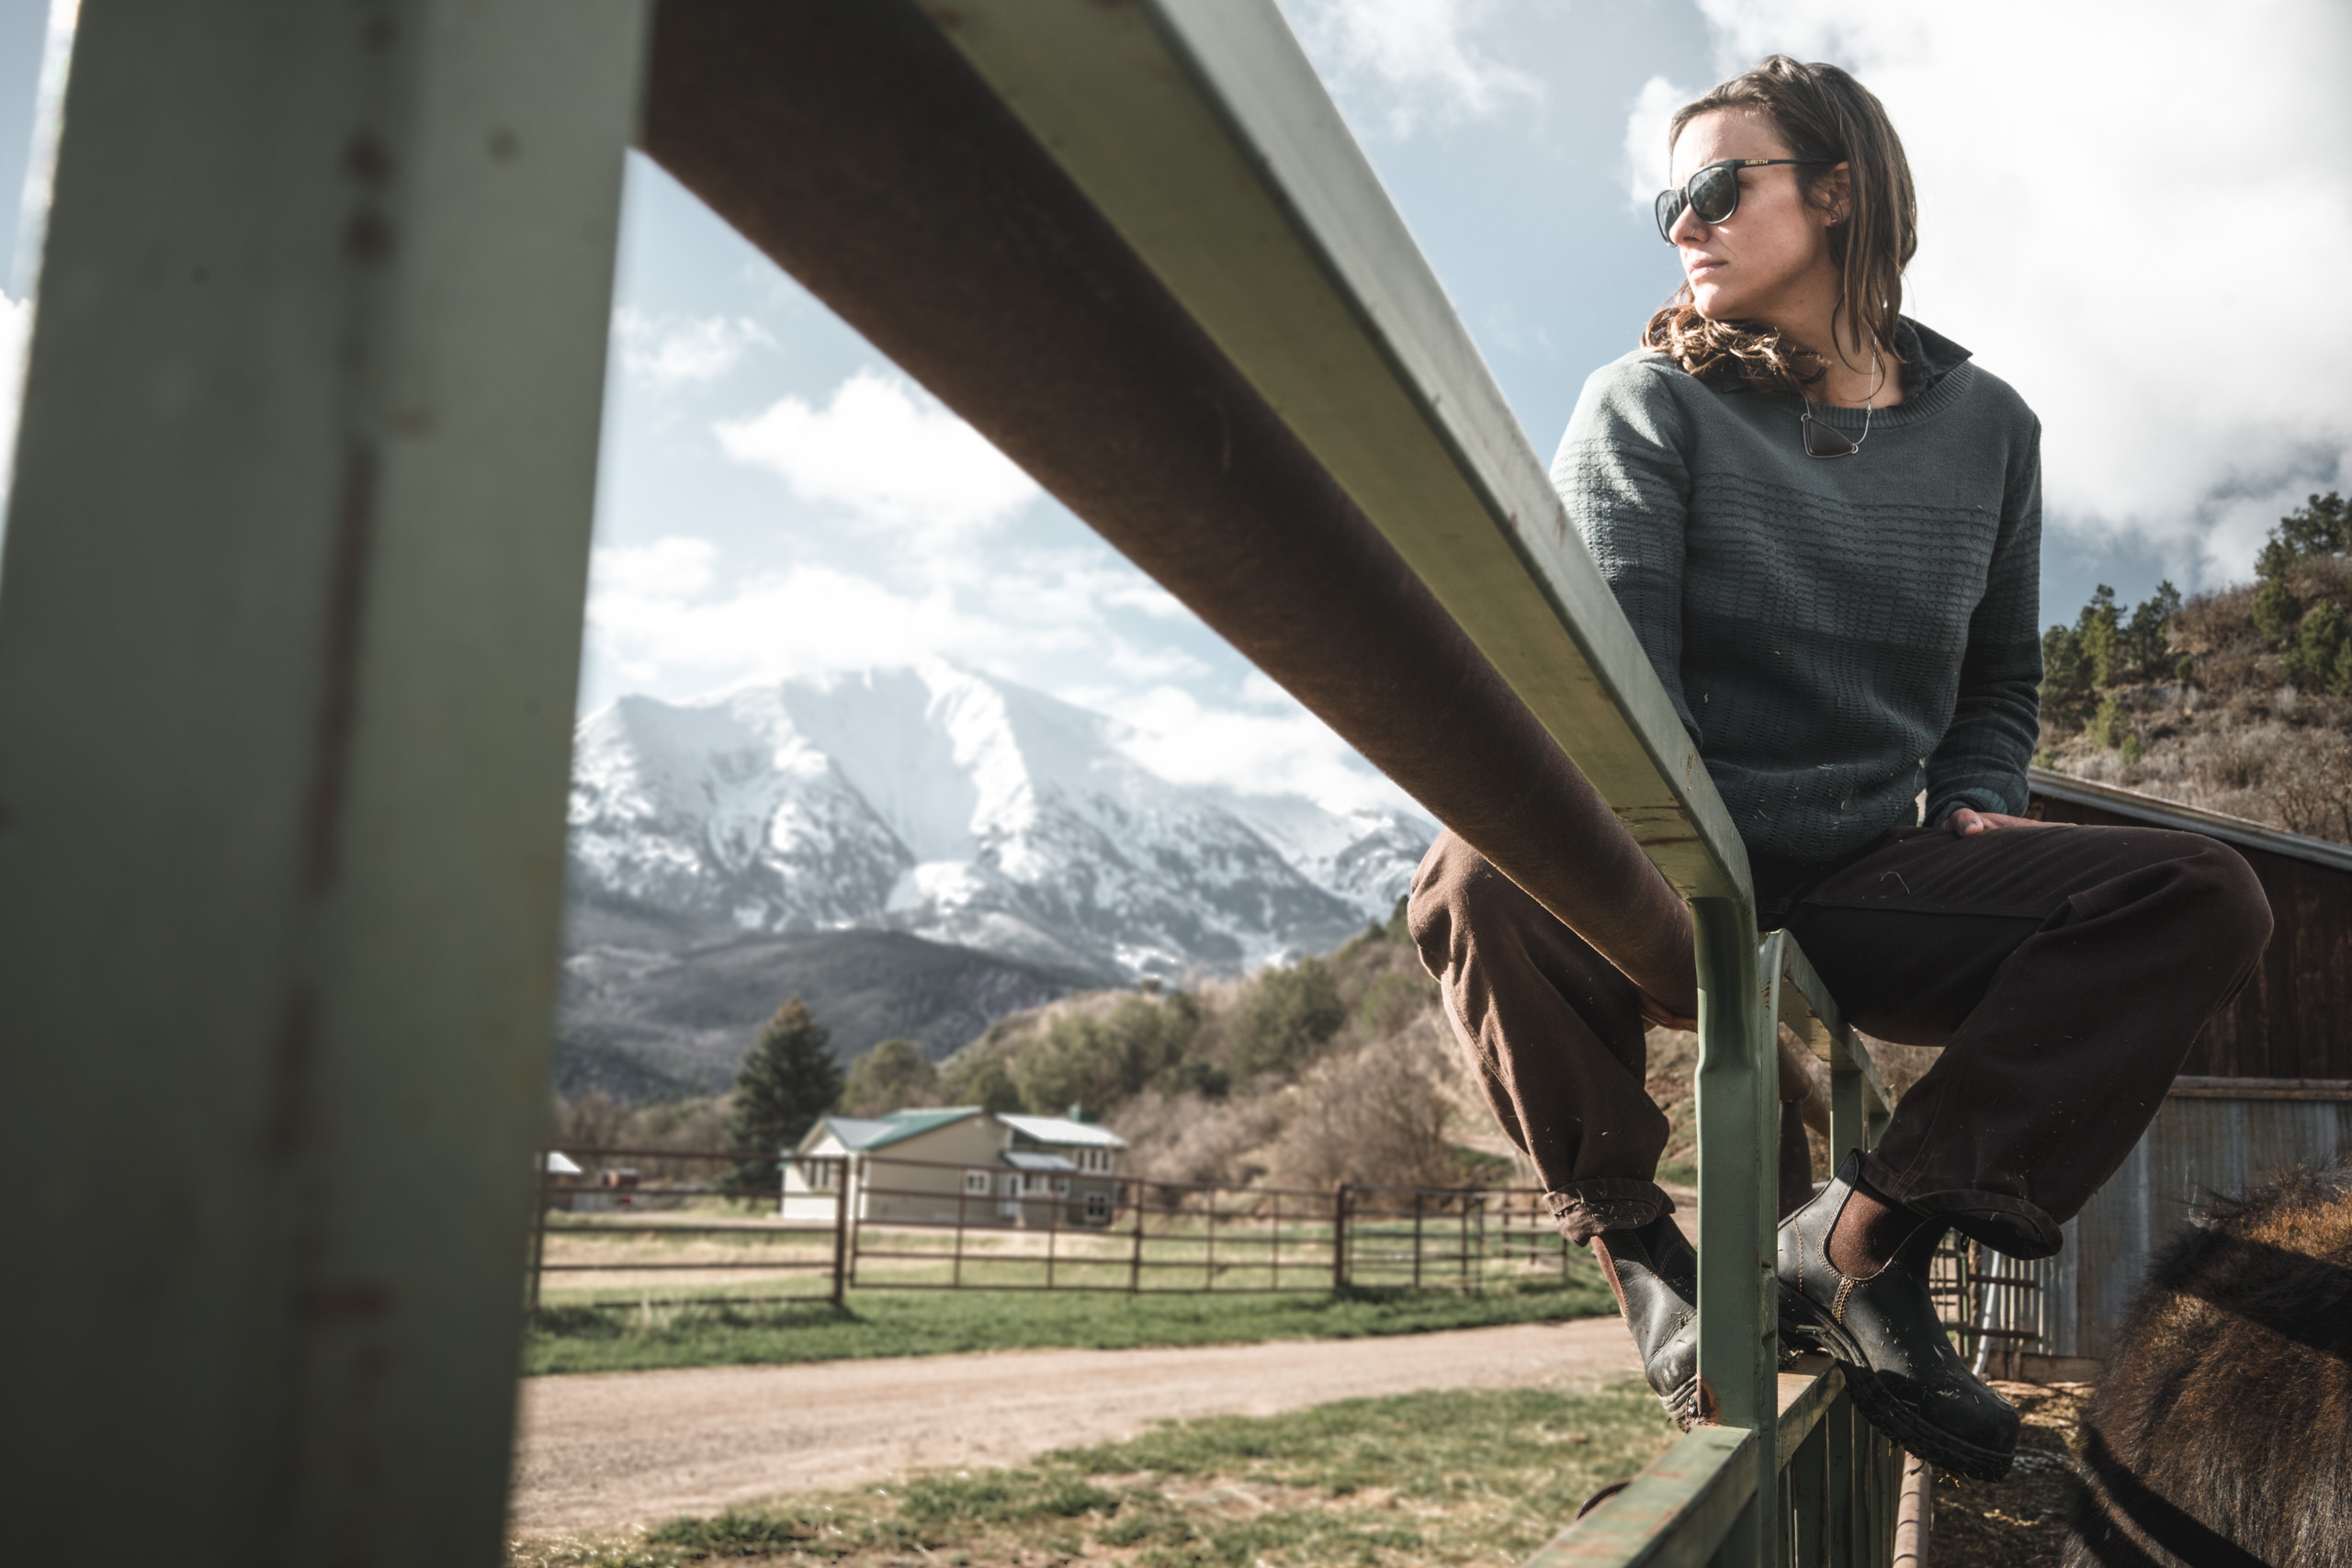 Erin Cuseo in Blundstone Boots in Carbondale, Colorado